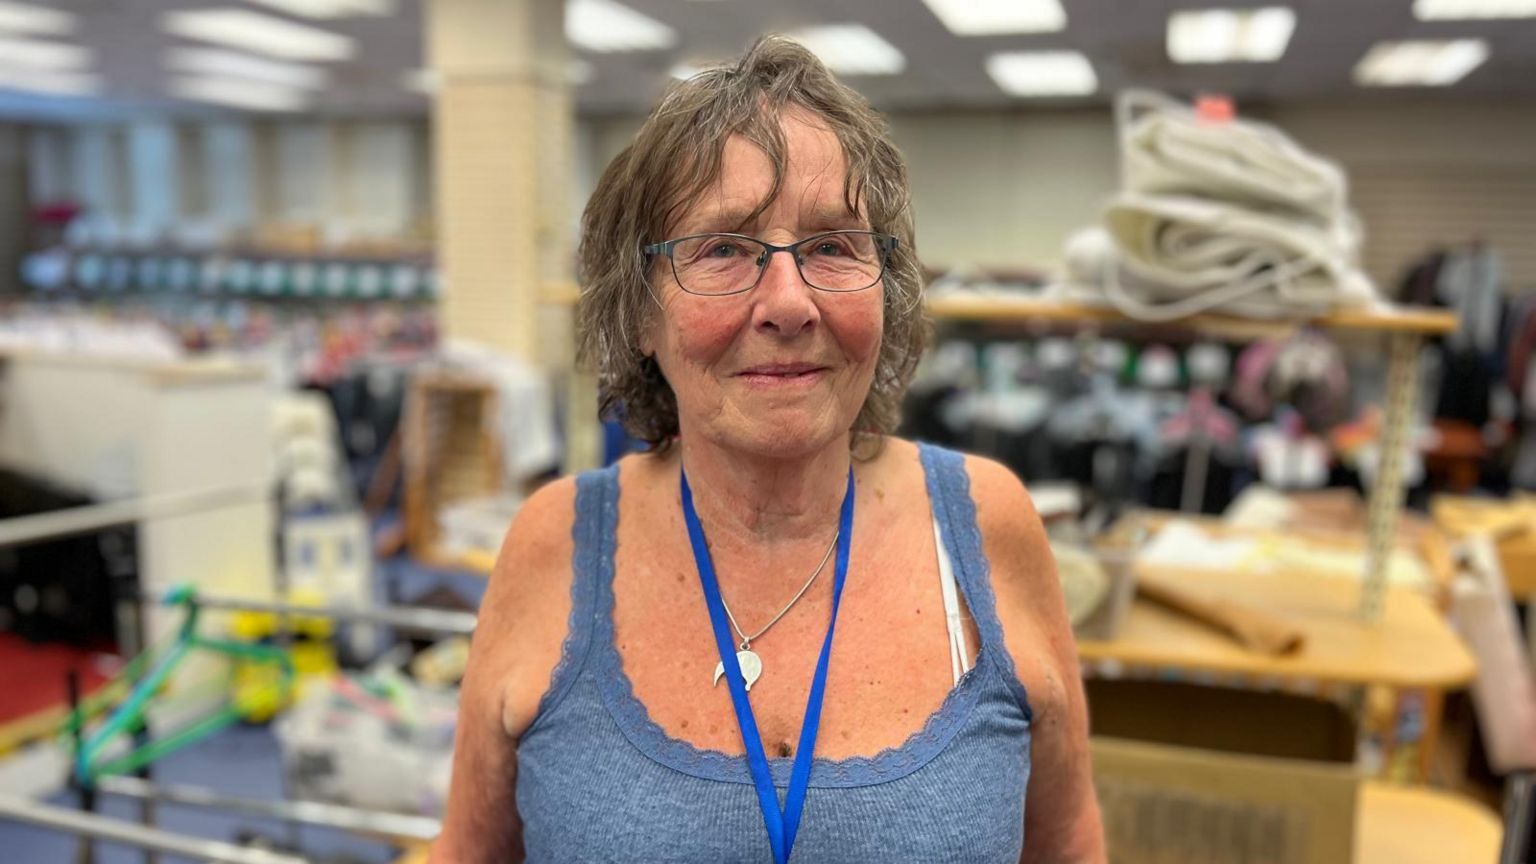 Jane Robinson looks into the camera, wearing glasses, standing in a shop unit